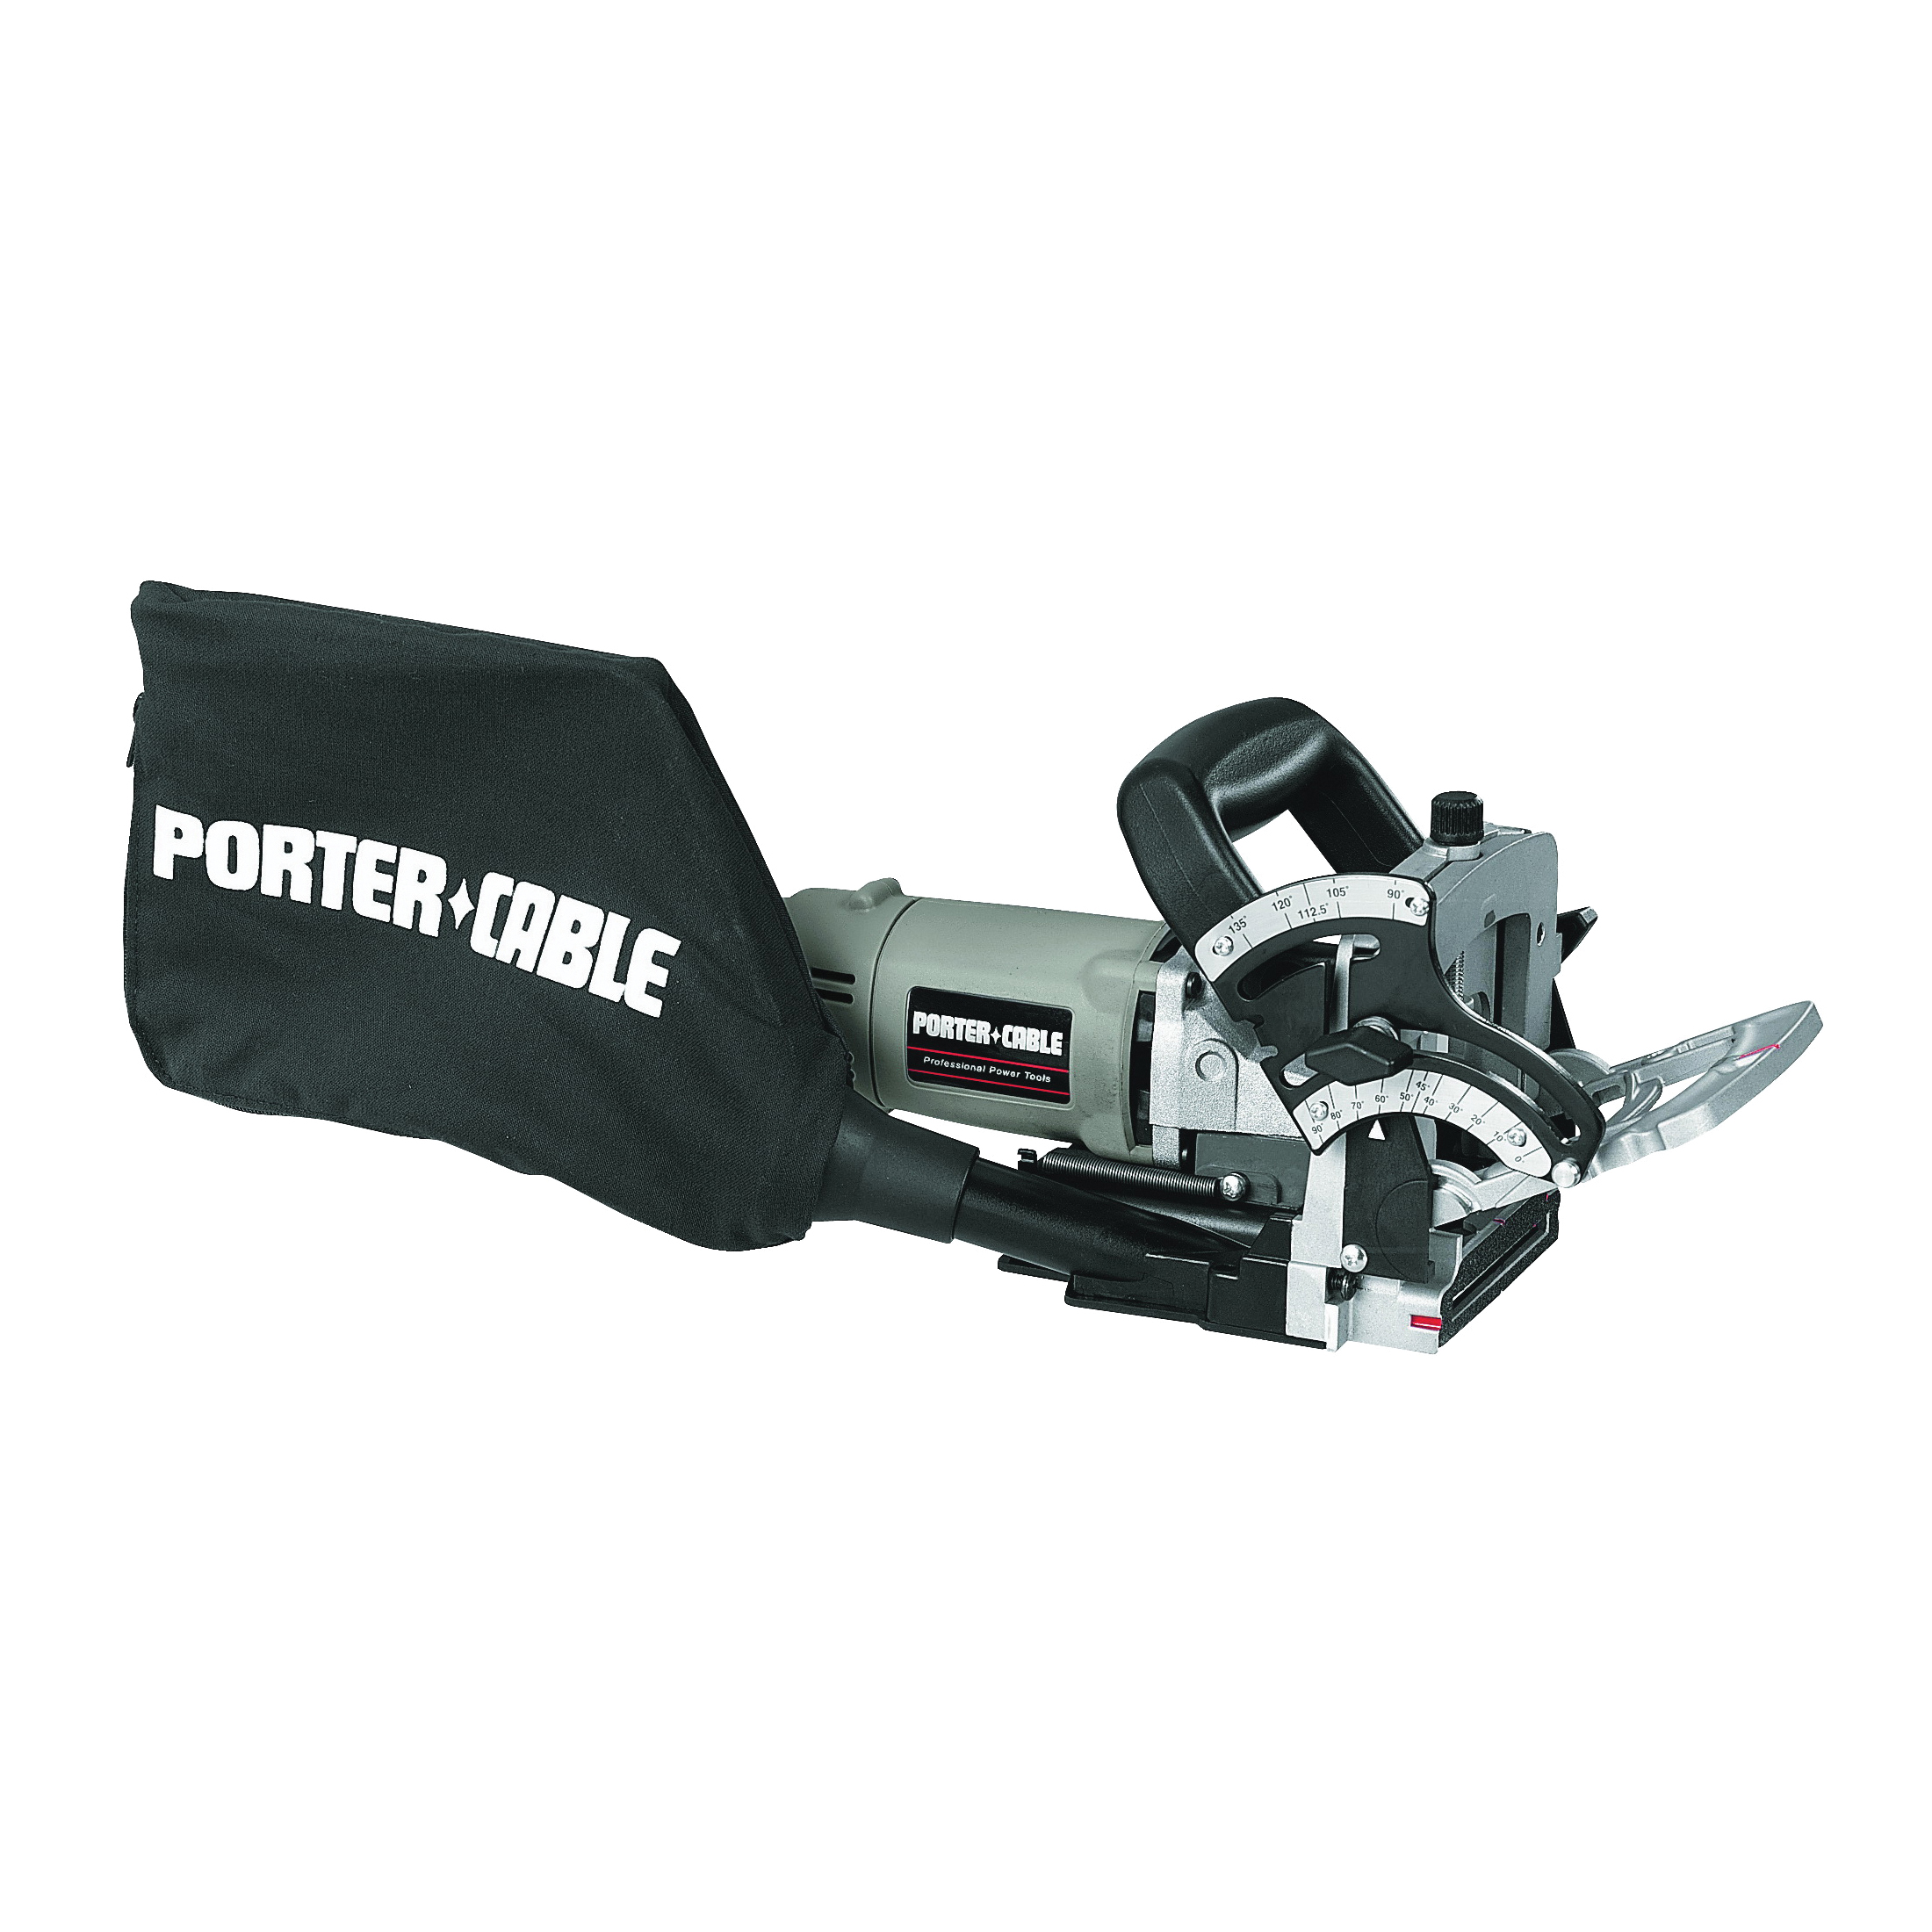 PORTER-CABLE 557 Plate Joiner Kit, 7 A, 20 in D Cutting, FF, #0, #10, #20, Simplex, Duplex, #6 Max Biscuit, 6 T Blade - 2